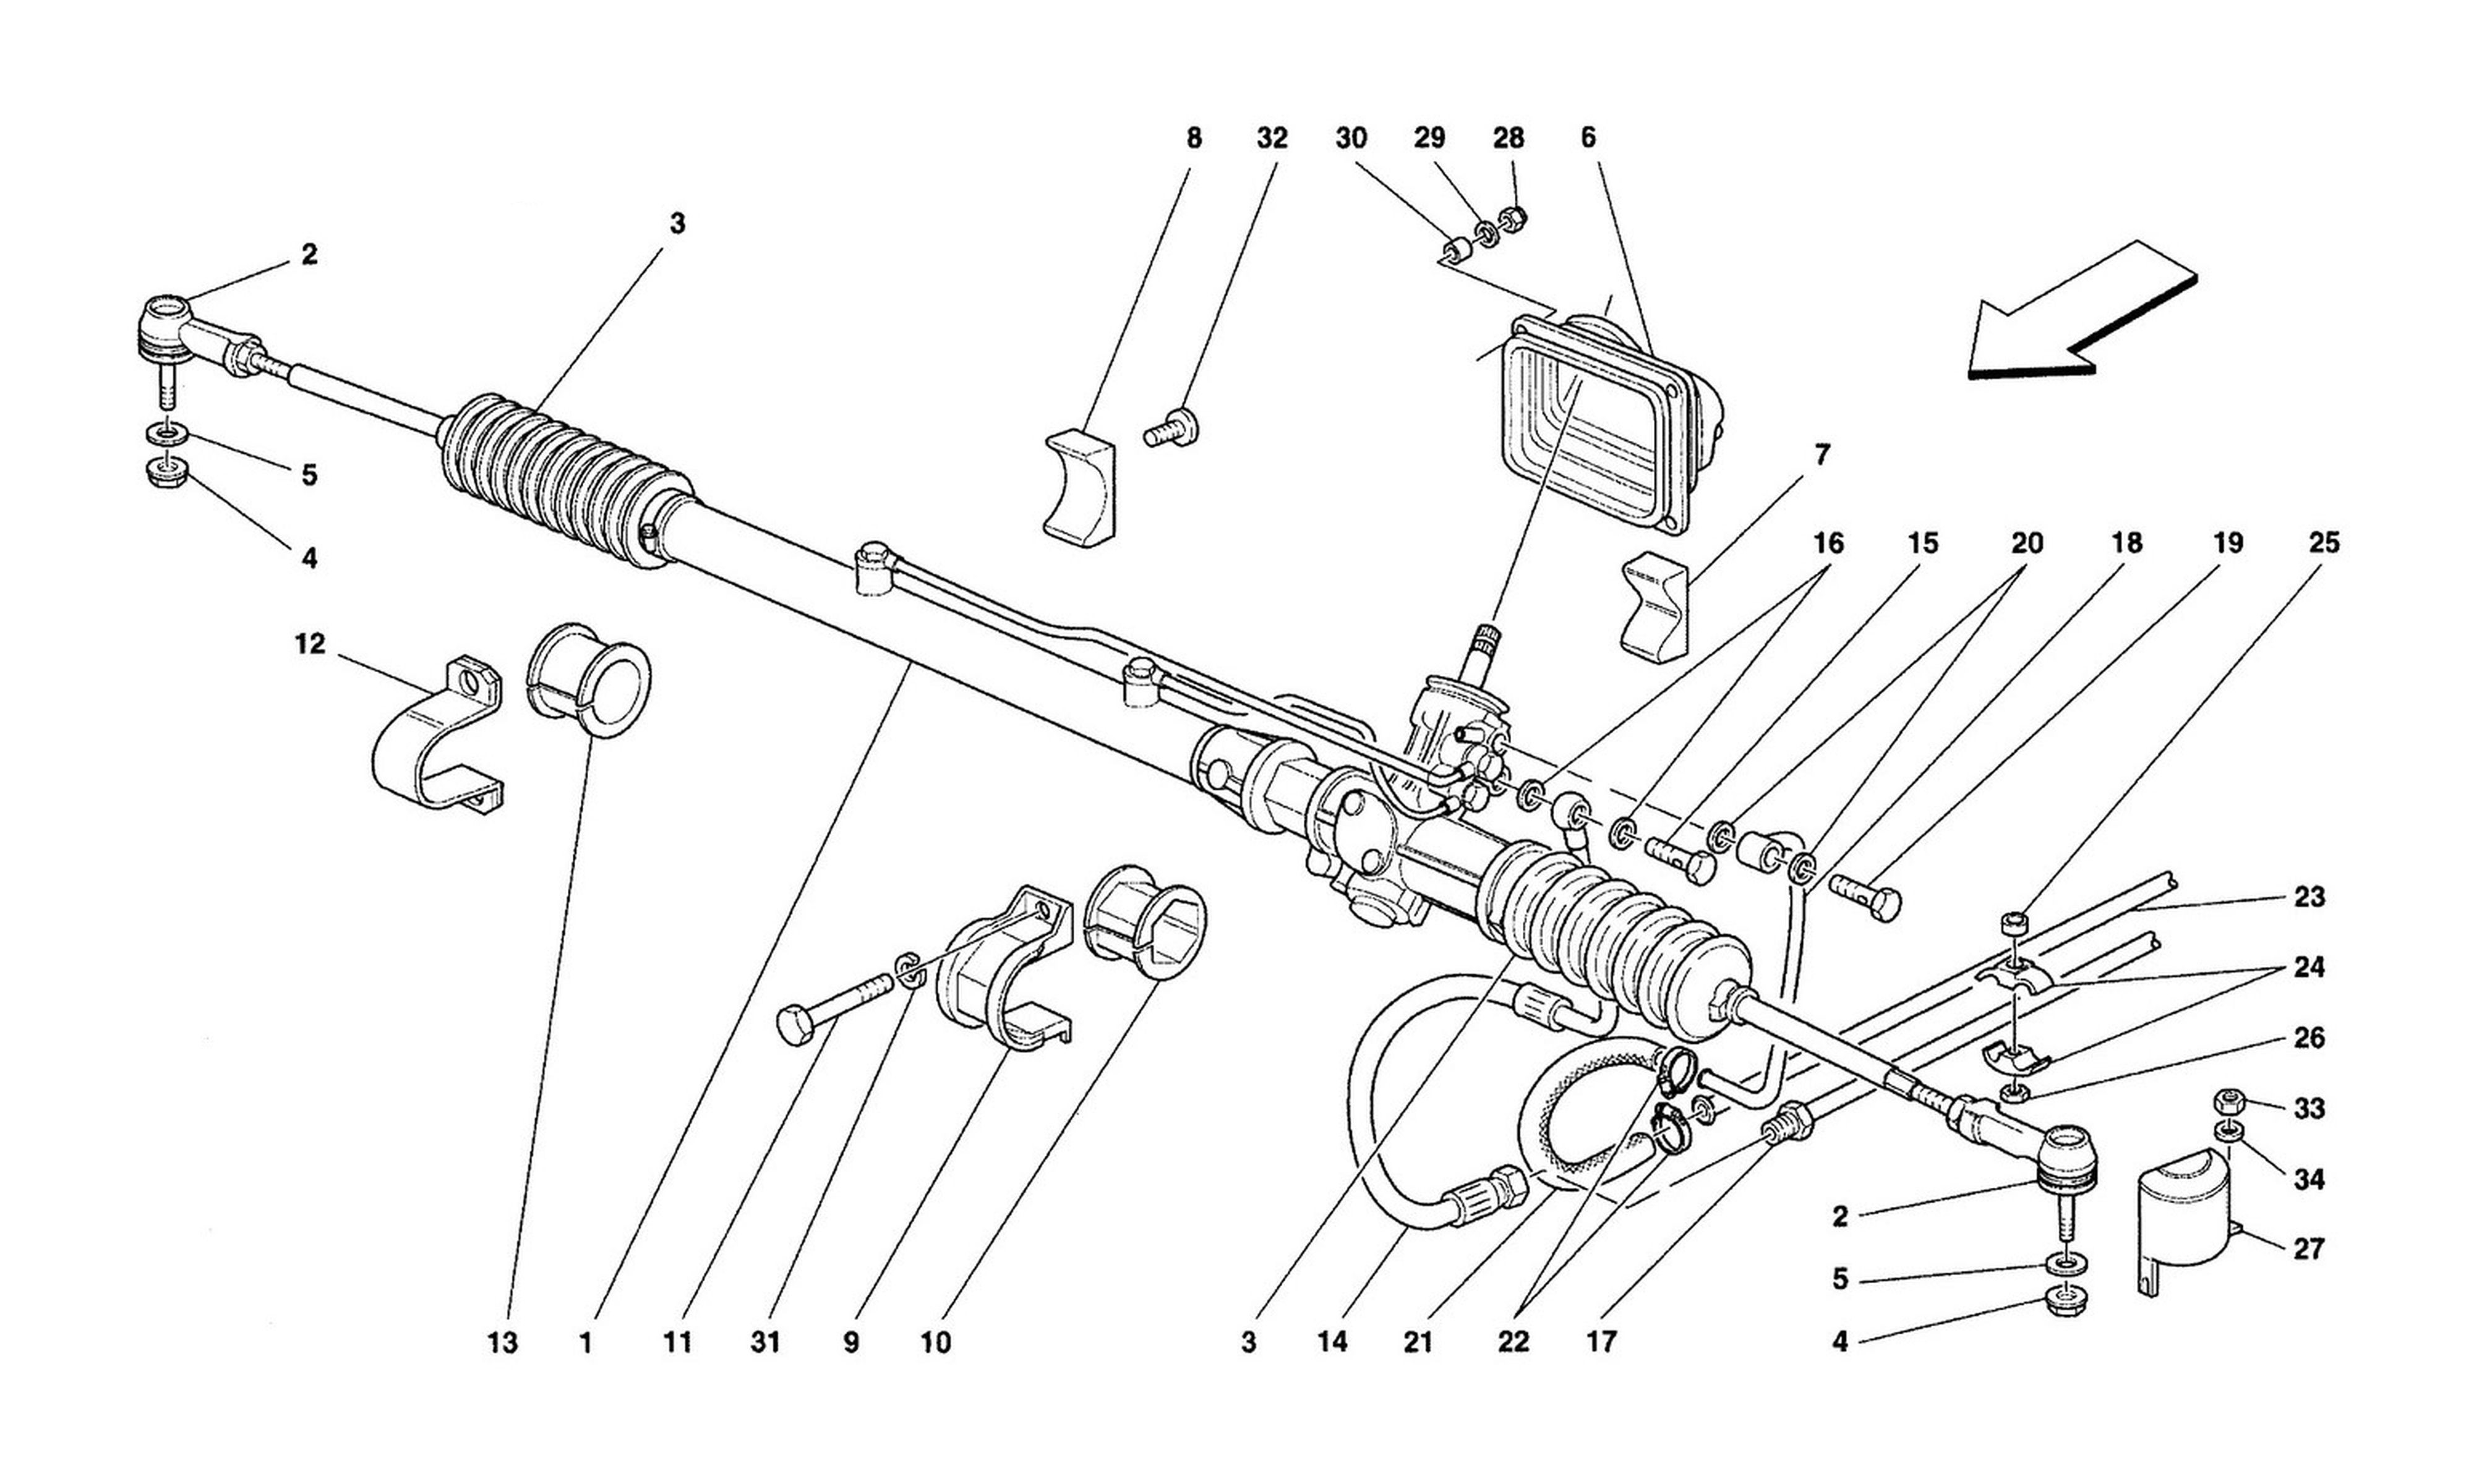 Schematic: Hydraulic Steering Box And Linkage